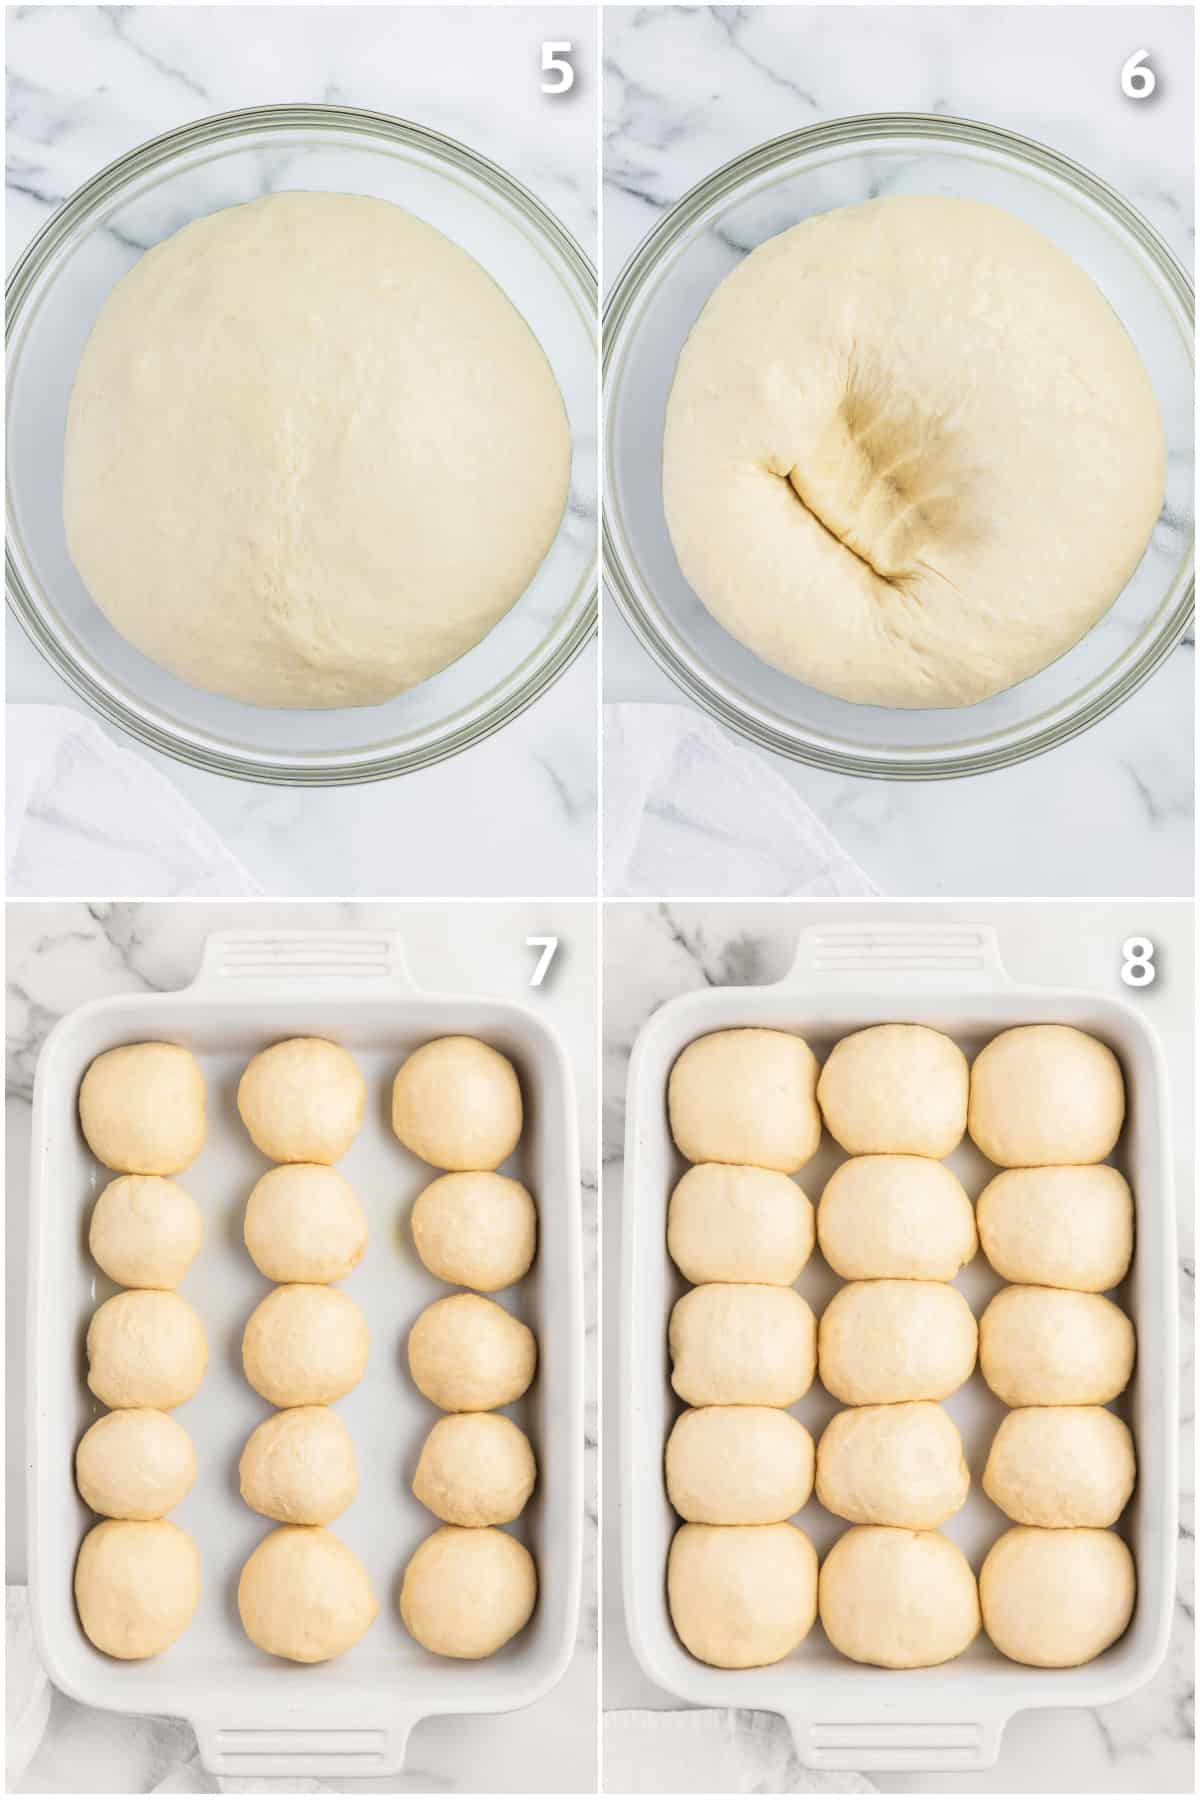 Dough being shaped into balls and in a baking dish.